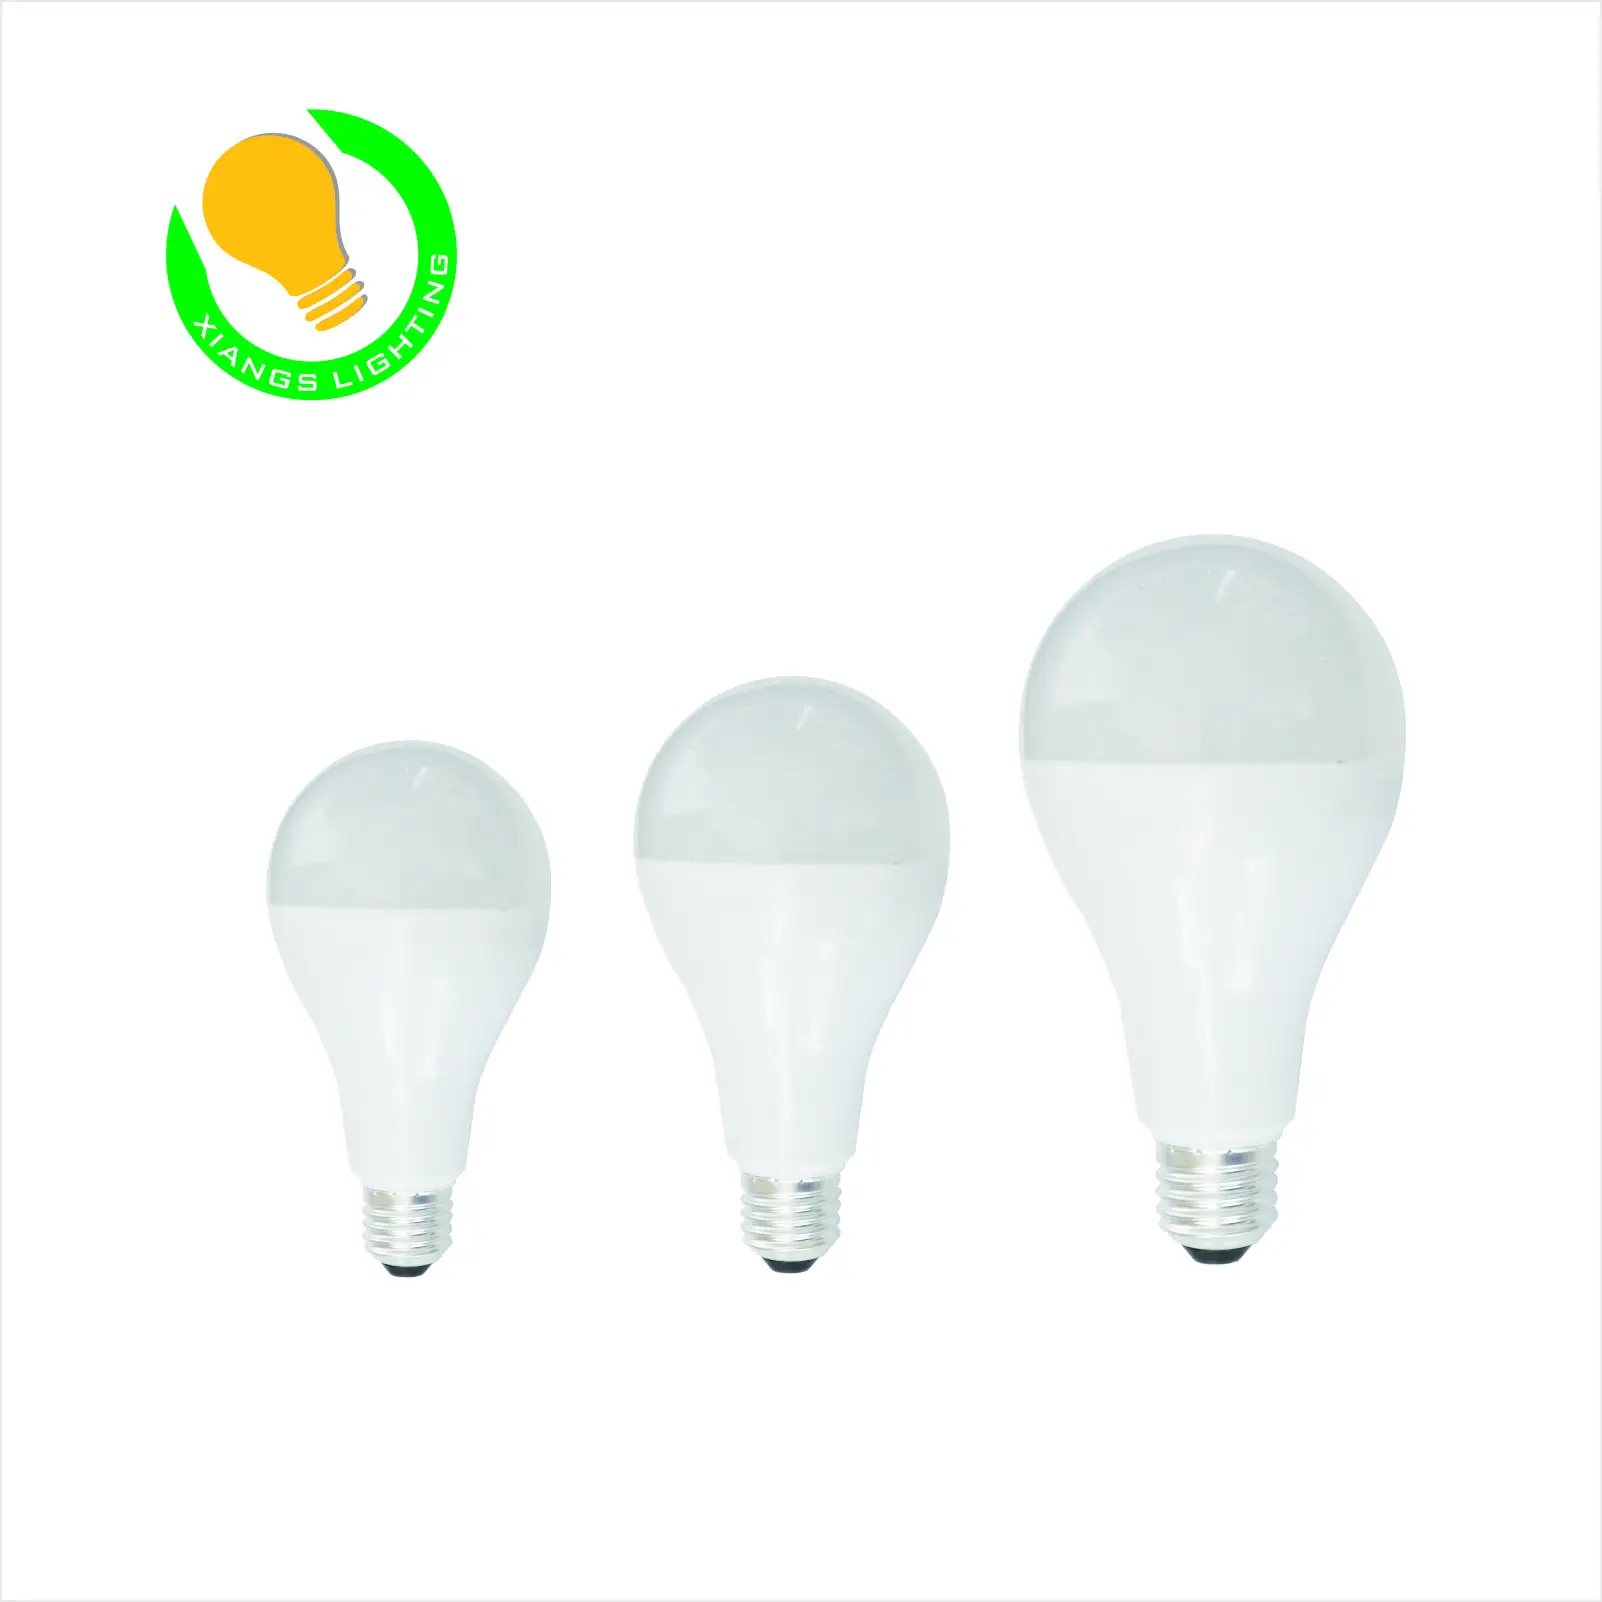 Led A80 Lamp 20W 1800lm Lamp A60 A 65 T Lamp Energiebesparing